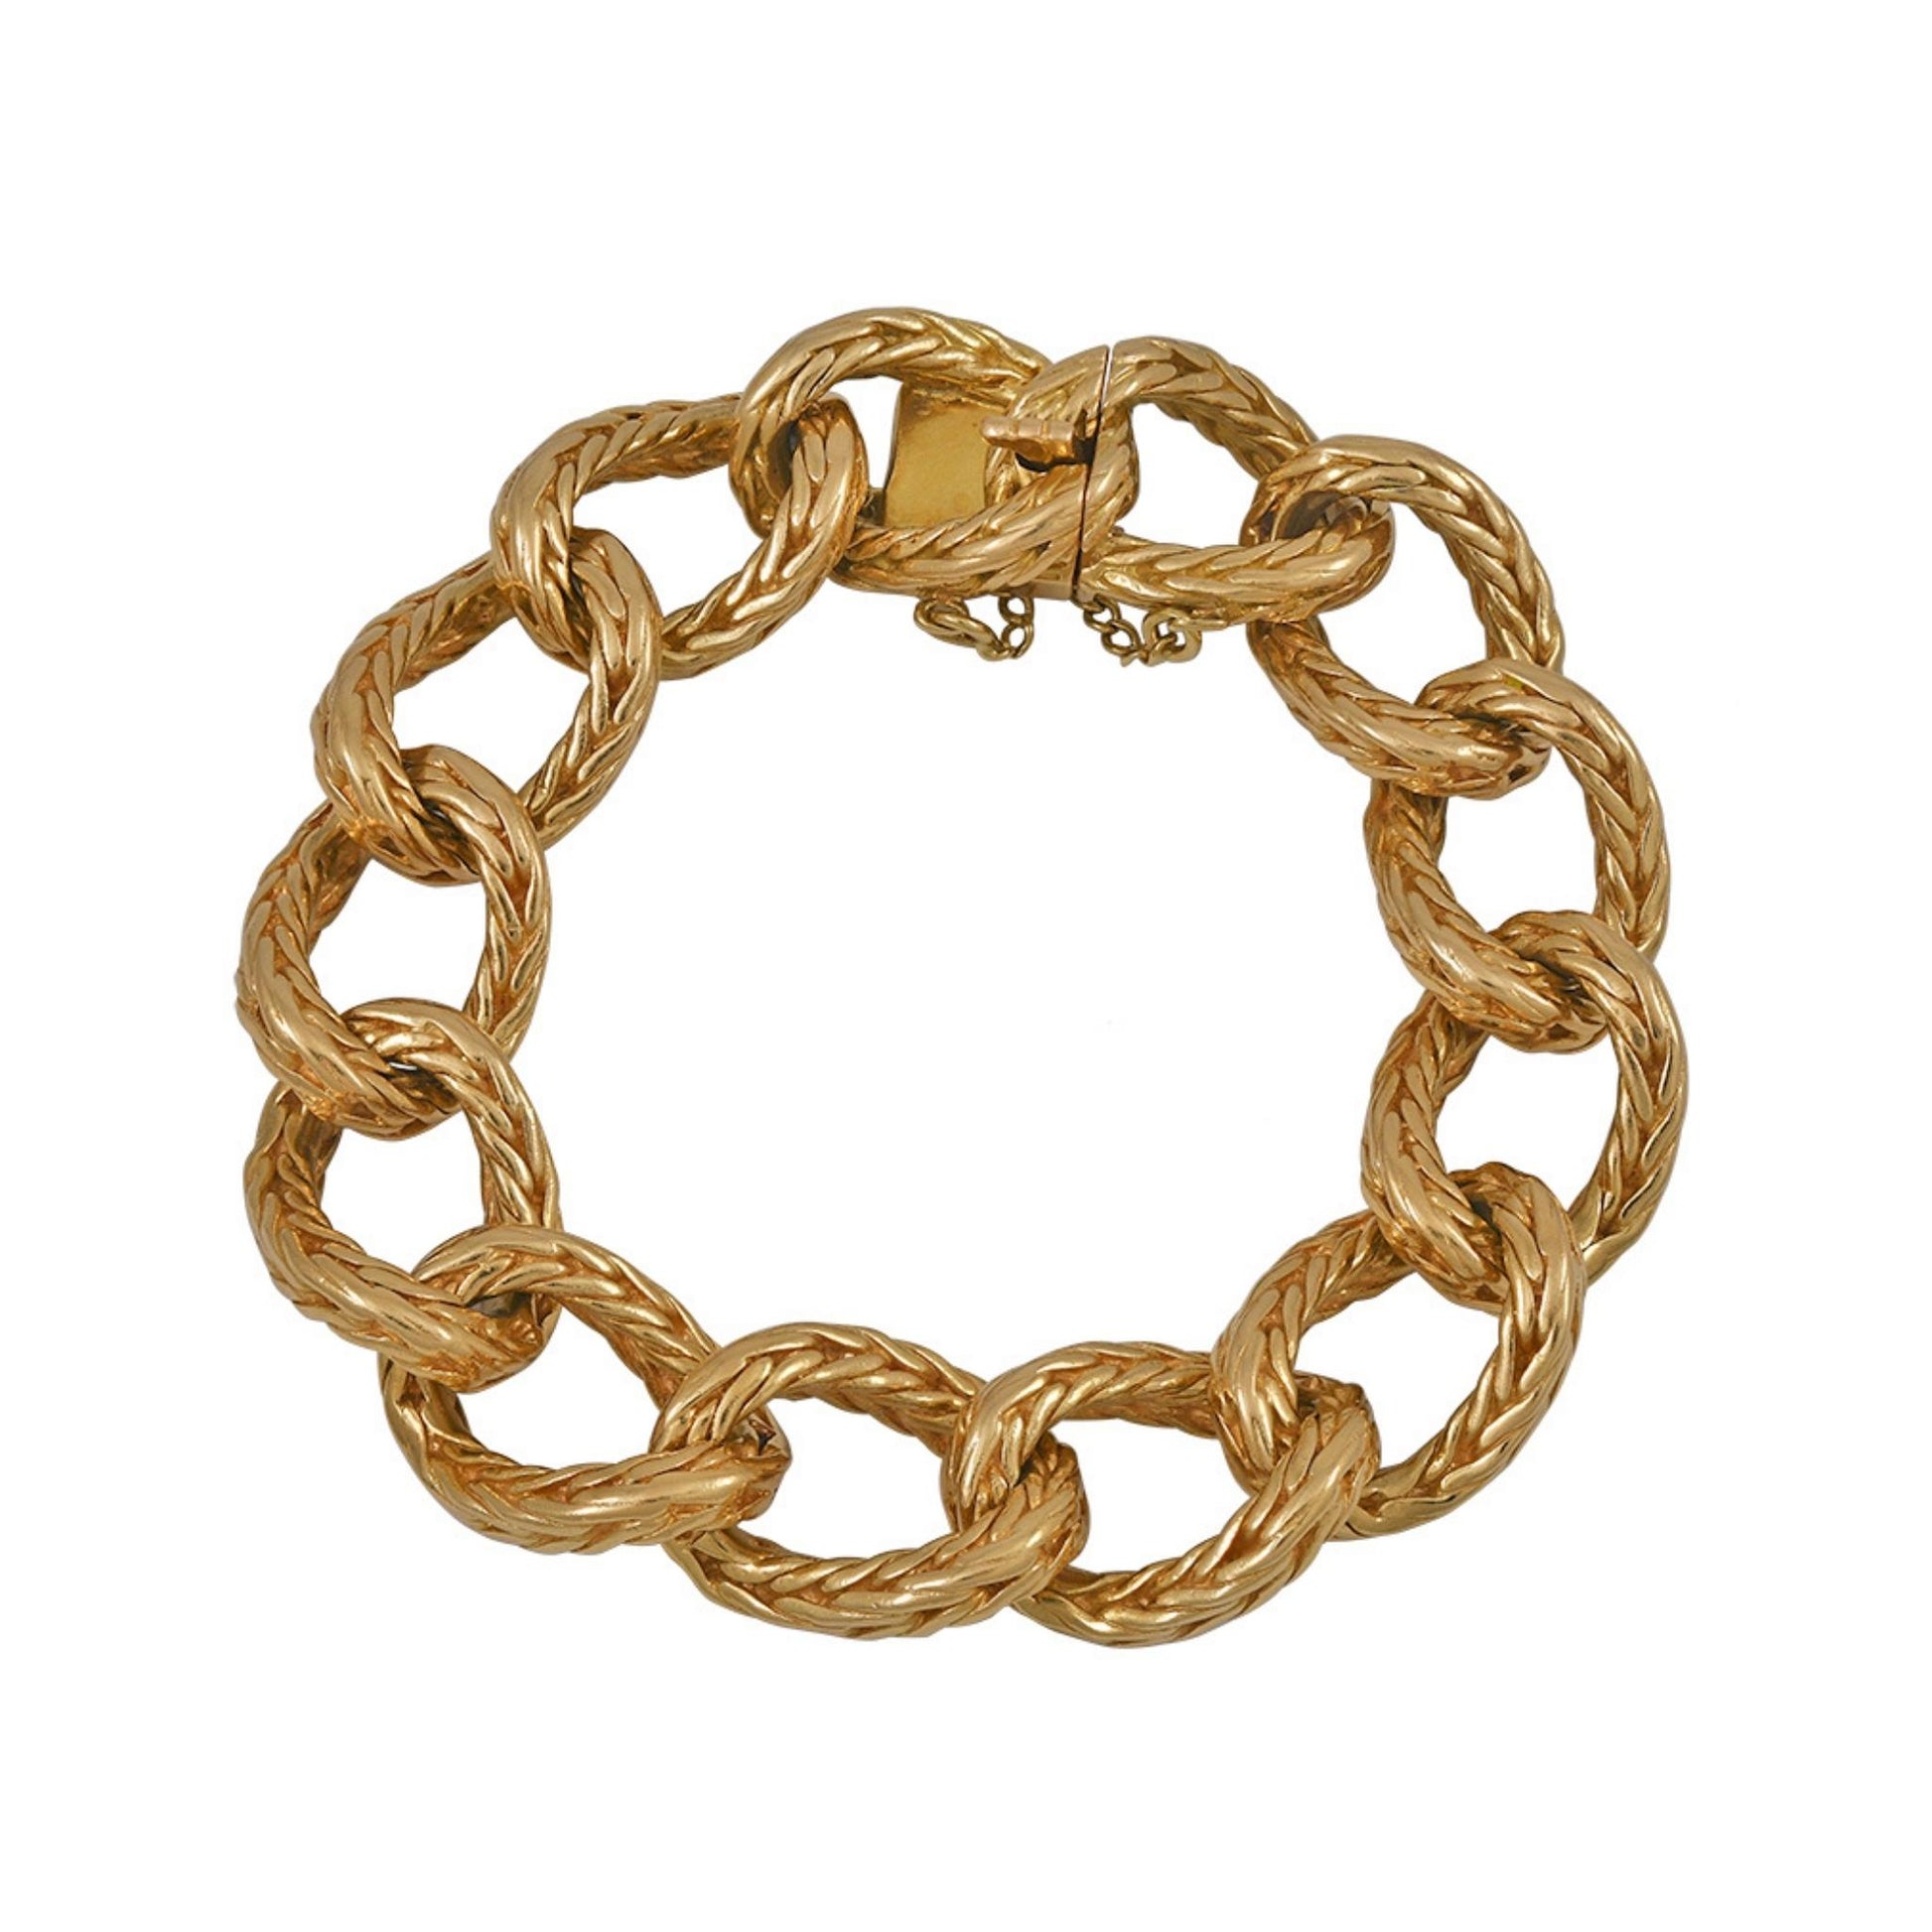 French Braided Gold Curb Link Bracelet